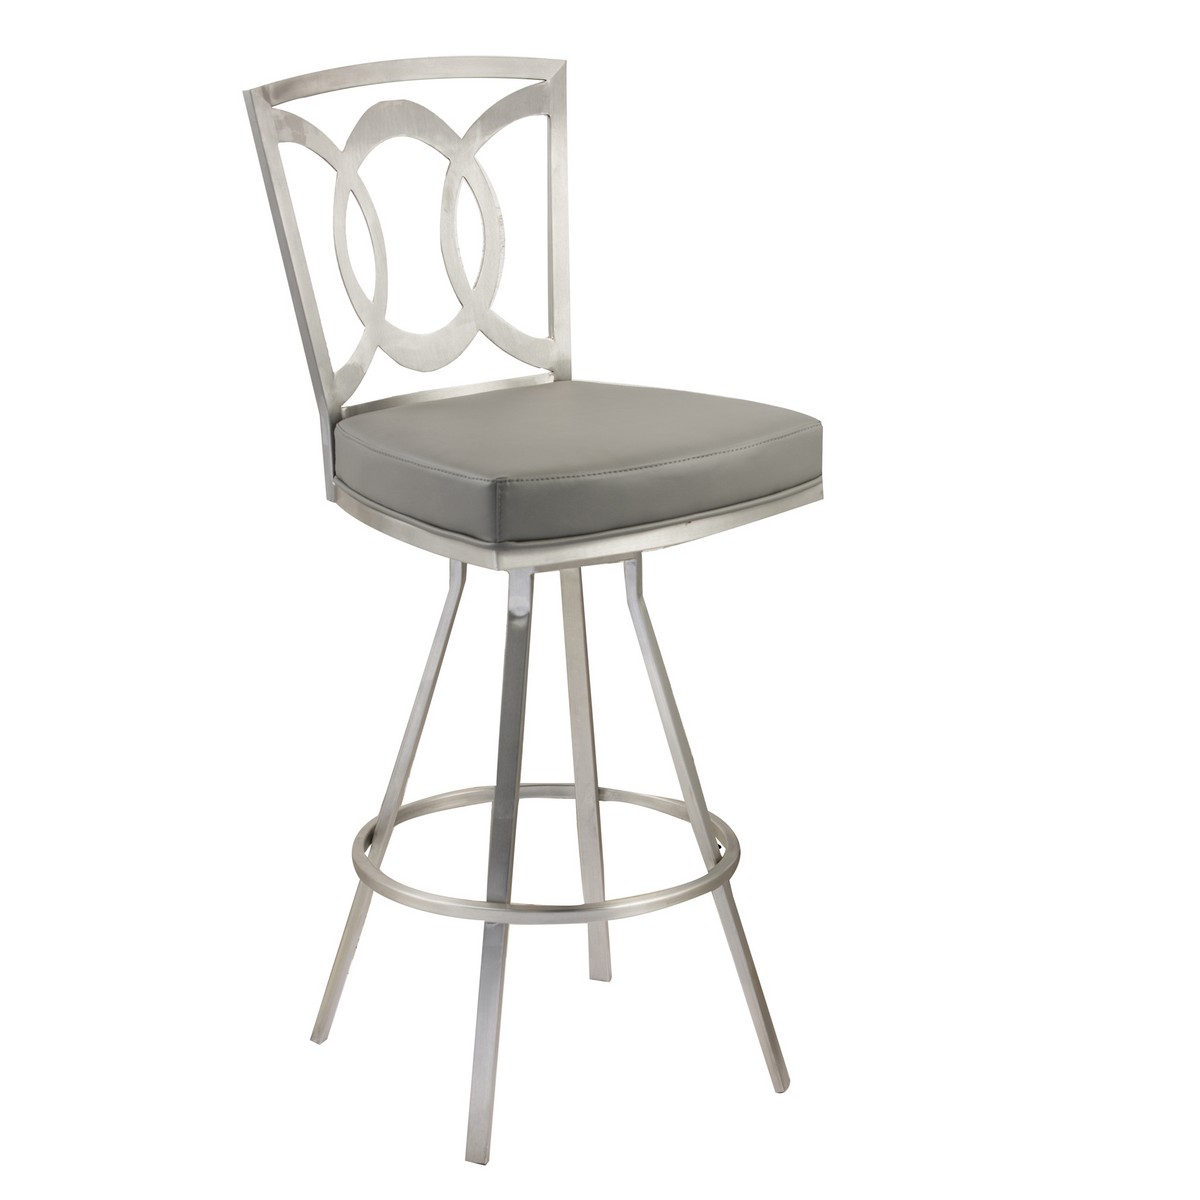 Armen Living Drake 30-inch Contemporary Swivel Barstool In Gray and Stainless Steel